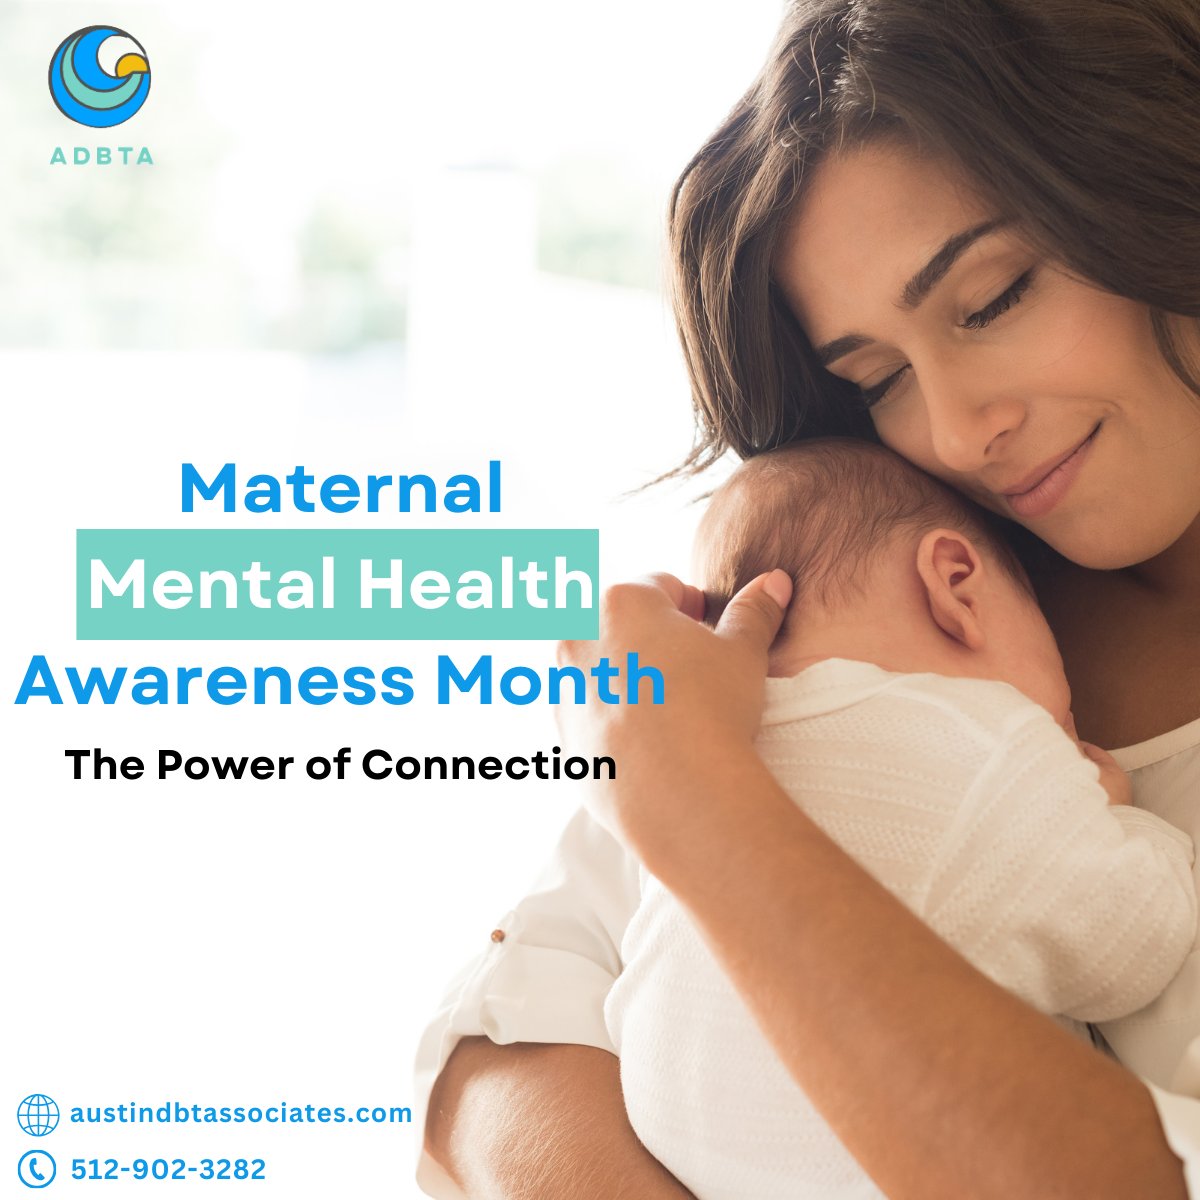 From pregnancy to postpartum and beyond, every mom deserves understanding, support, and care. Together, let's break the silence and offer compassion to all moms.💕  

#maternalmentalhealth  #supportformoms #adbta #mentalhealth #mentalhealthmatters #maternity